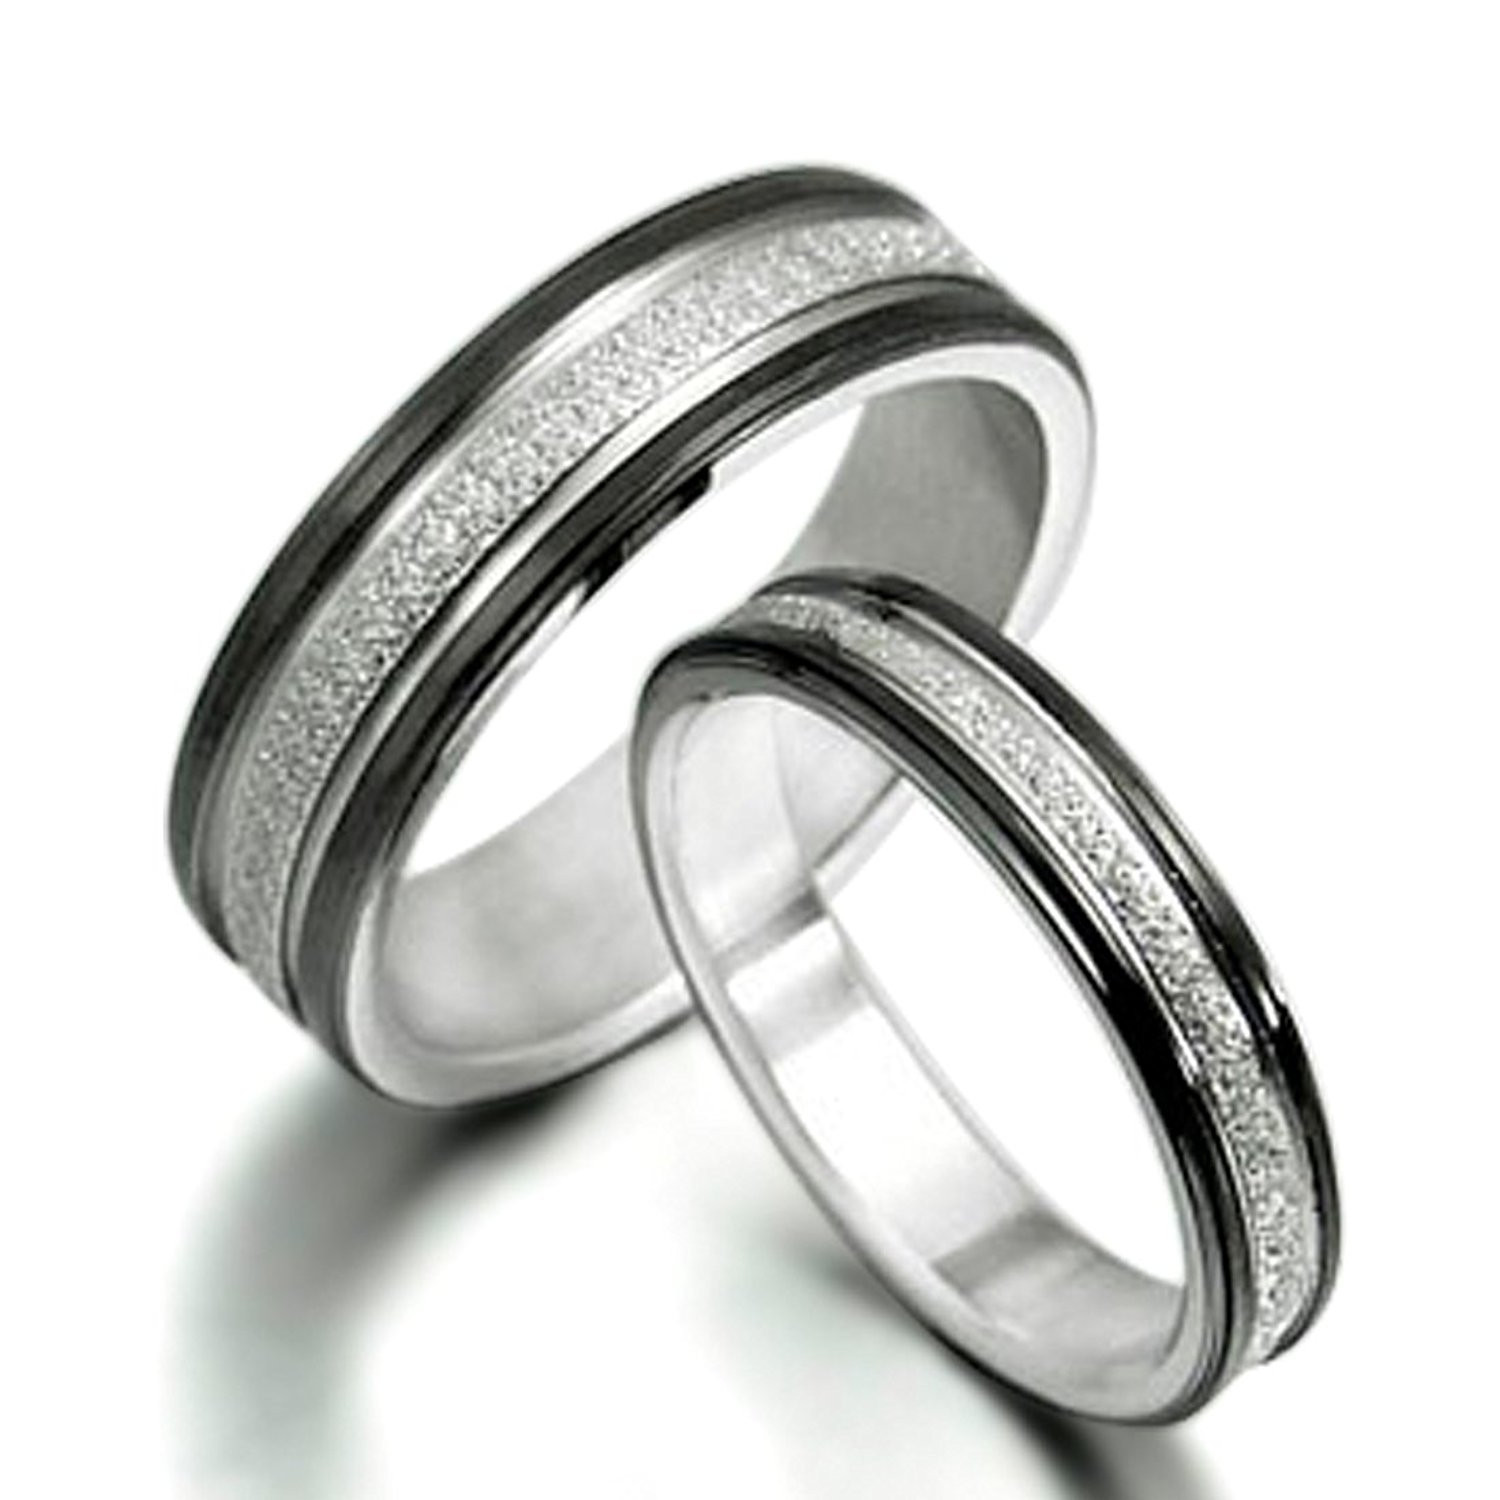 Titanium Matching Wedding Bands
 Awesome His and Hers Matching Wedding Bands Titanium